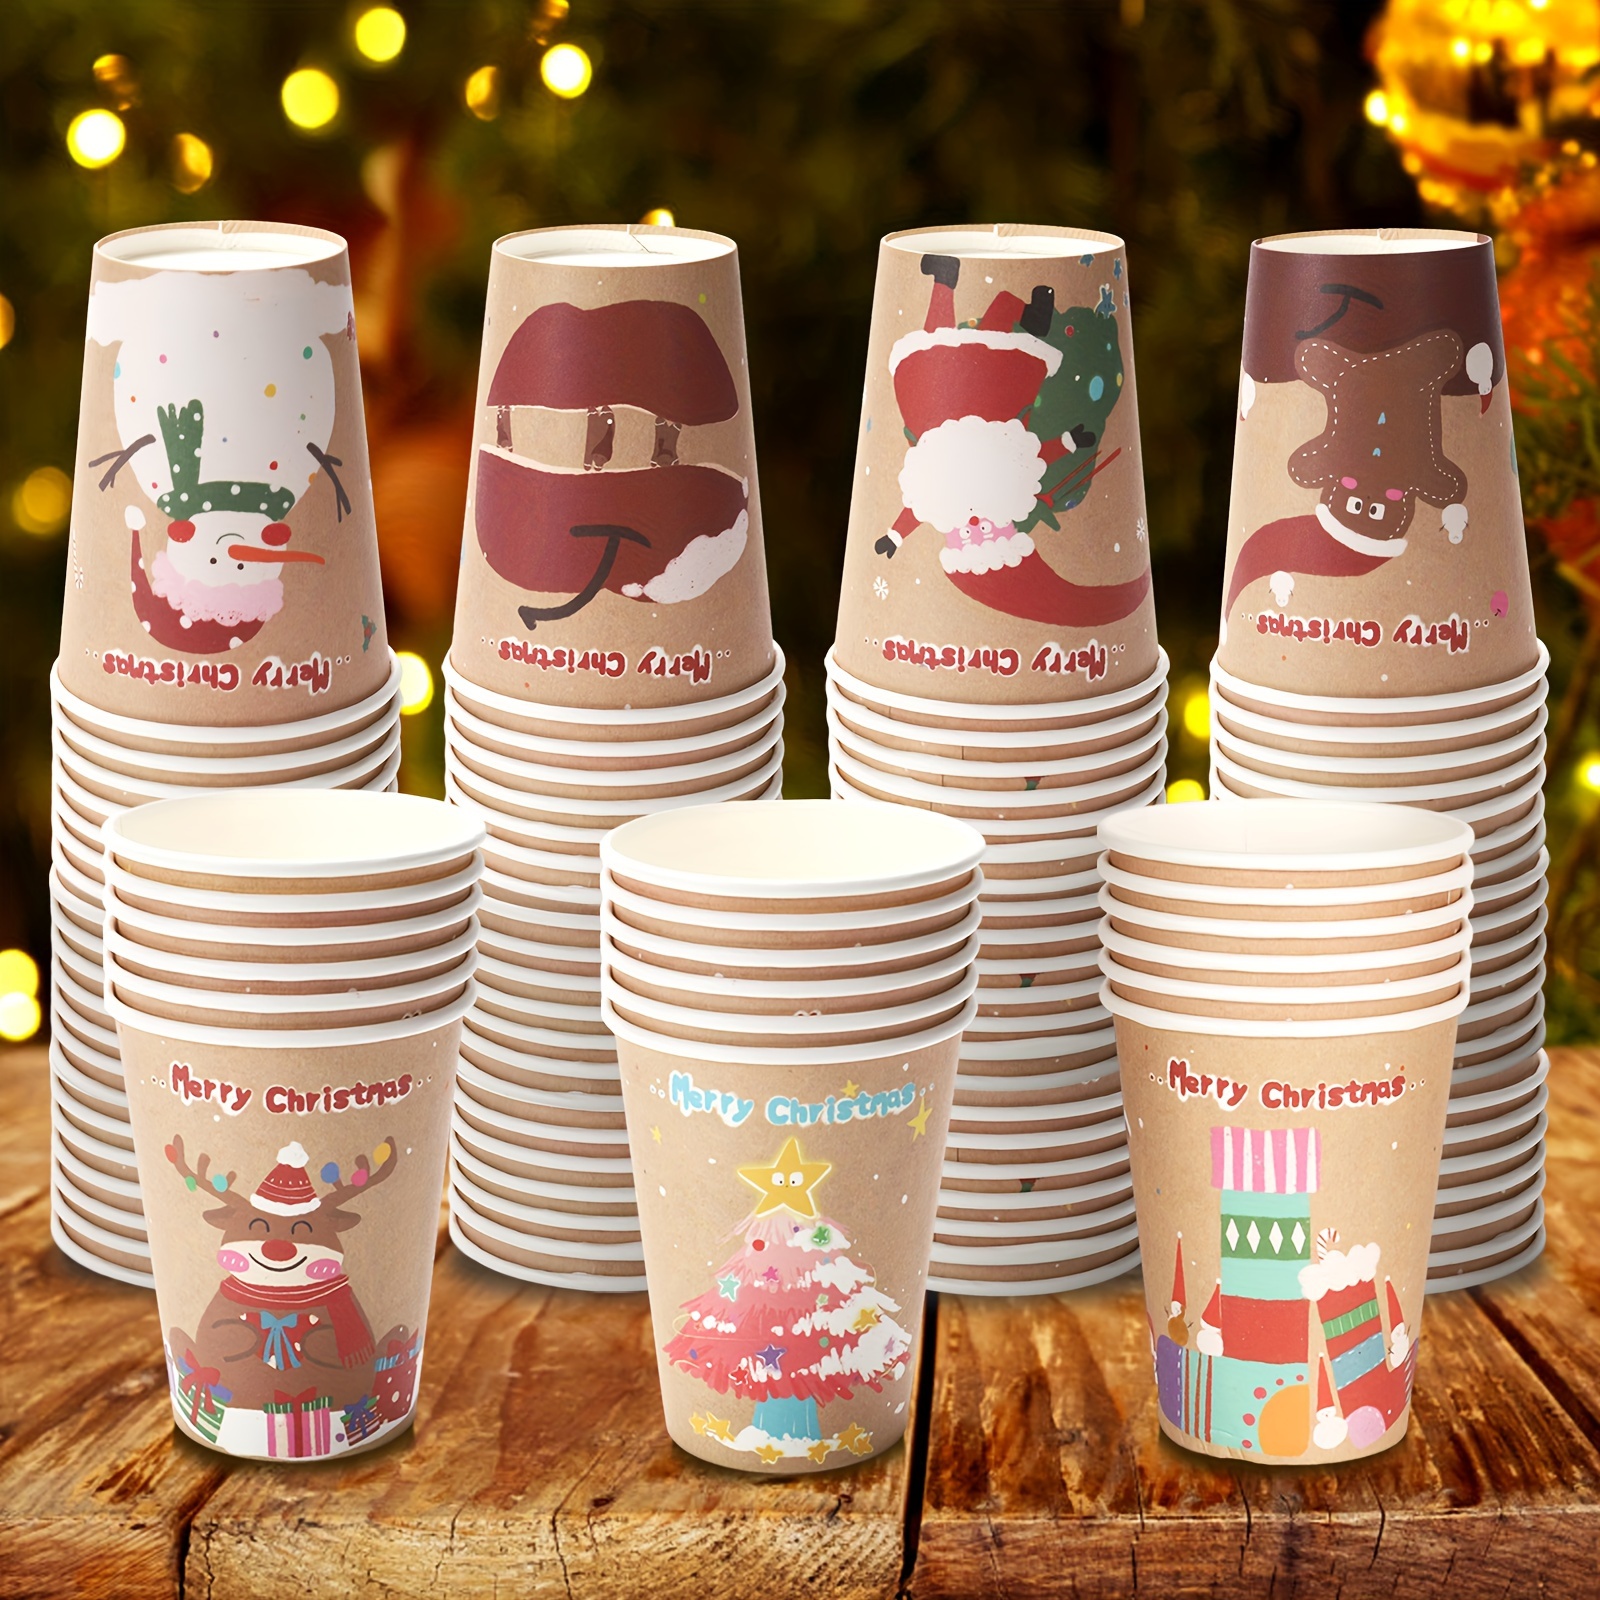 Fun Express Santa Disposable Plastic Cups (50 Cups) Holiday Party Supplies,  Drinkware, Favor Cups, T…See more Fun Express Santa Disposable Plastic